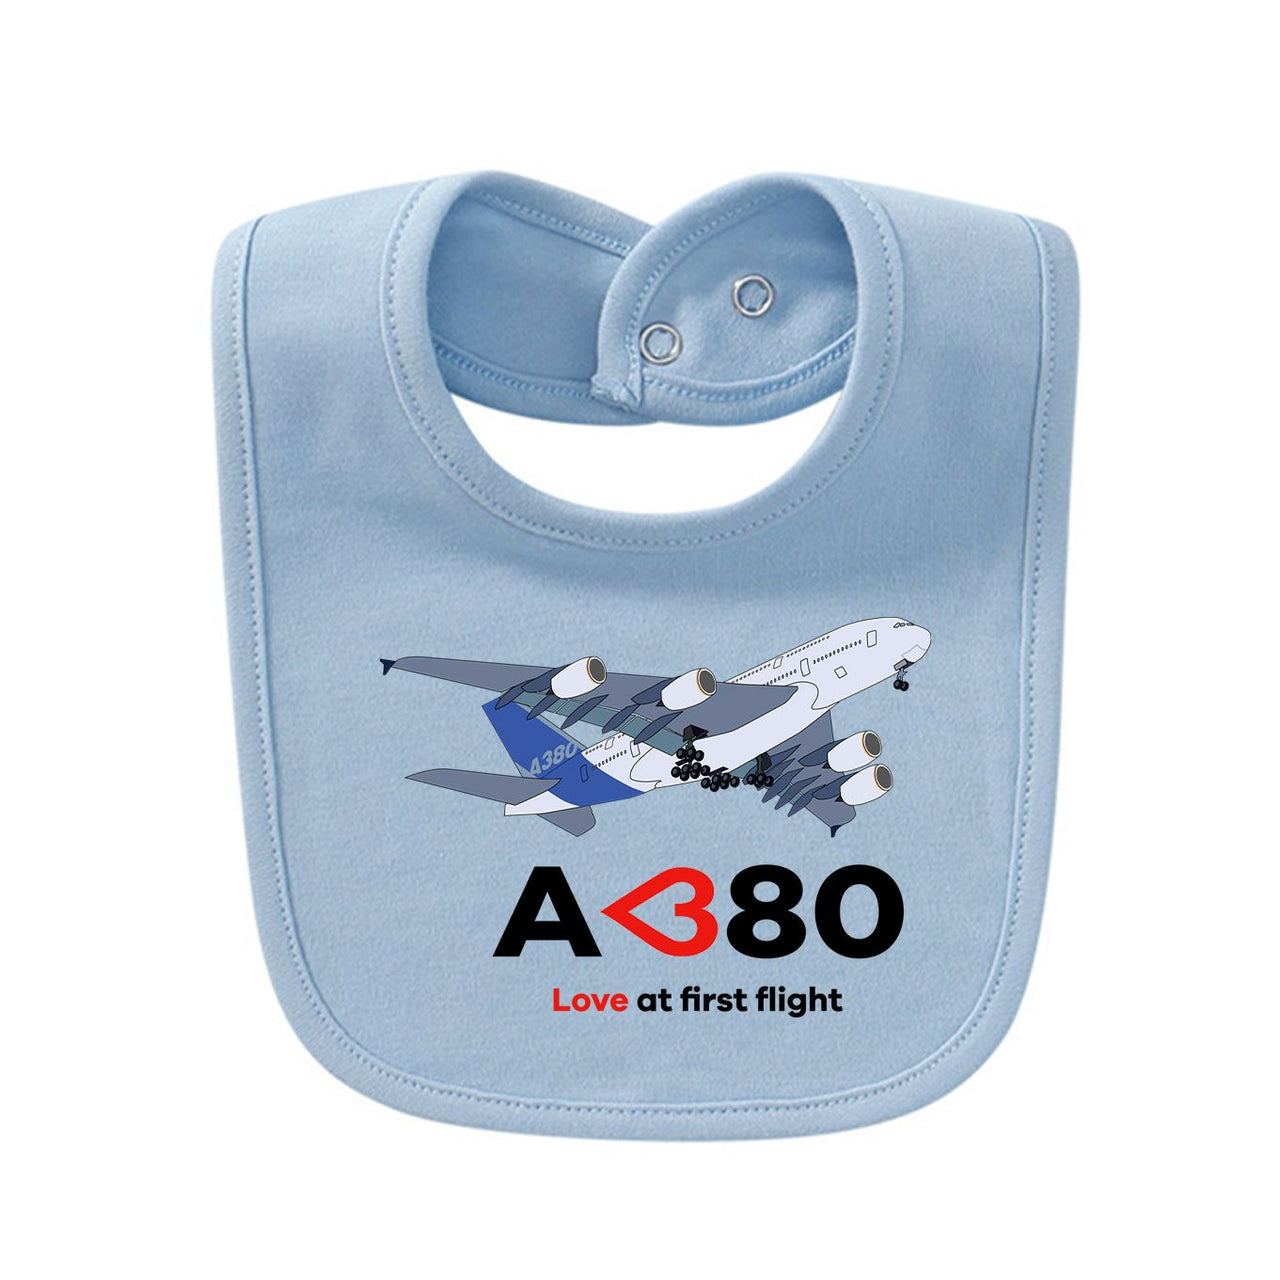 Airbus A380 Love at first flight Designed Baby Saliva & Feeding Towels